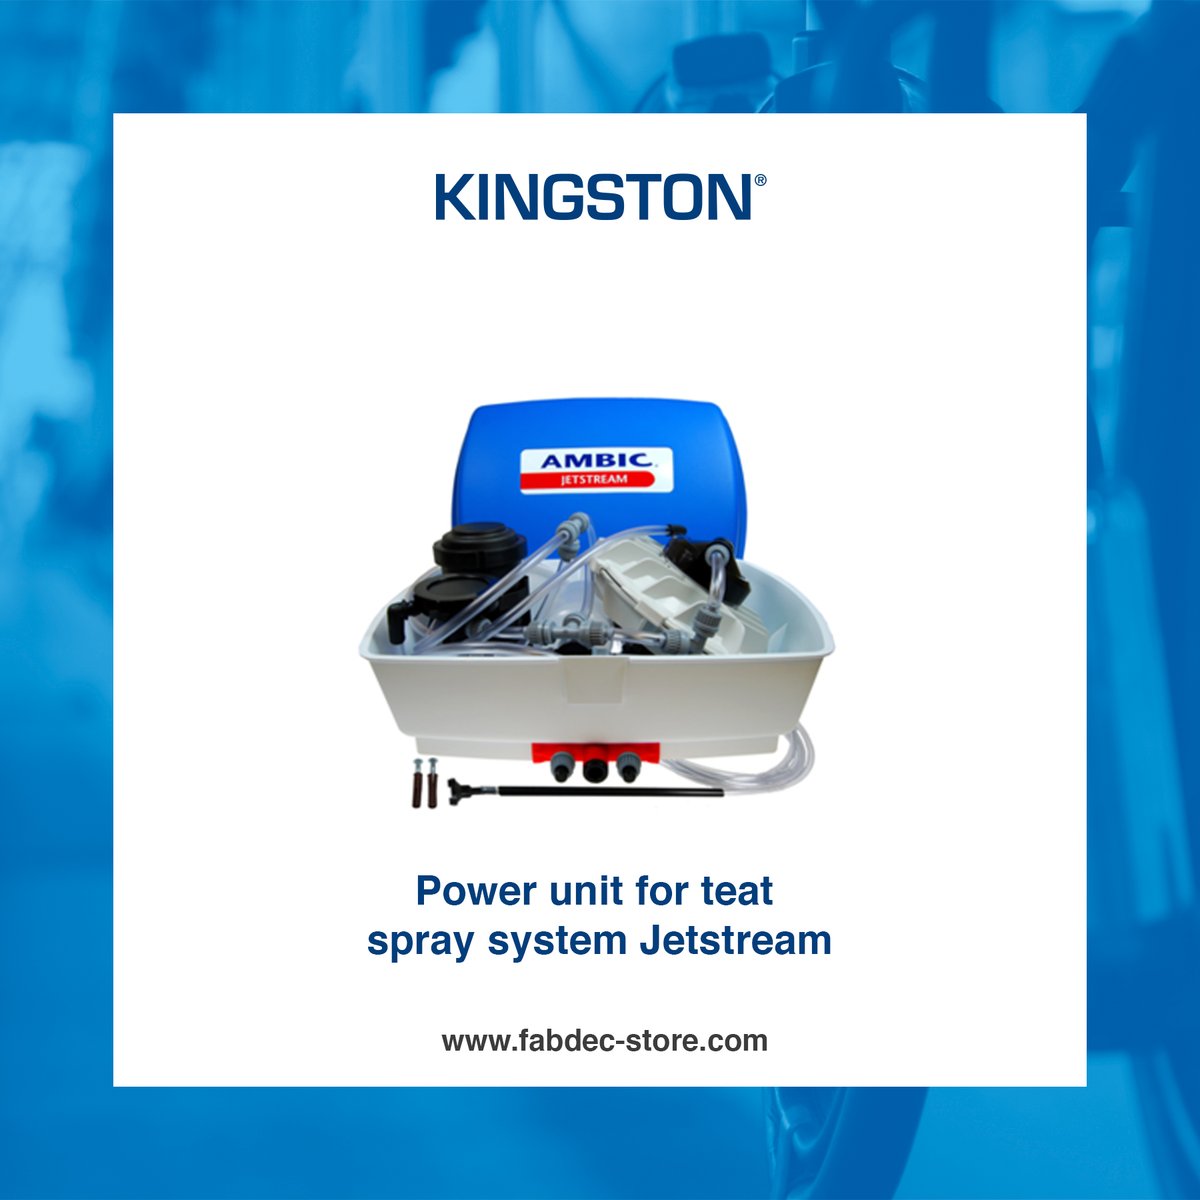 AMBIC Power unit for teat spray system Jetstream available from fabdec-store.com

#ambic #powerunit #spraysystem #jetstream #kingstonspares #kingston #fabdec #teamdairy #dairy #milking #milkingequipment #dairyfarming #farming #milkingconsumables #shoponline #parlourspares